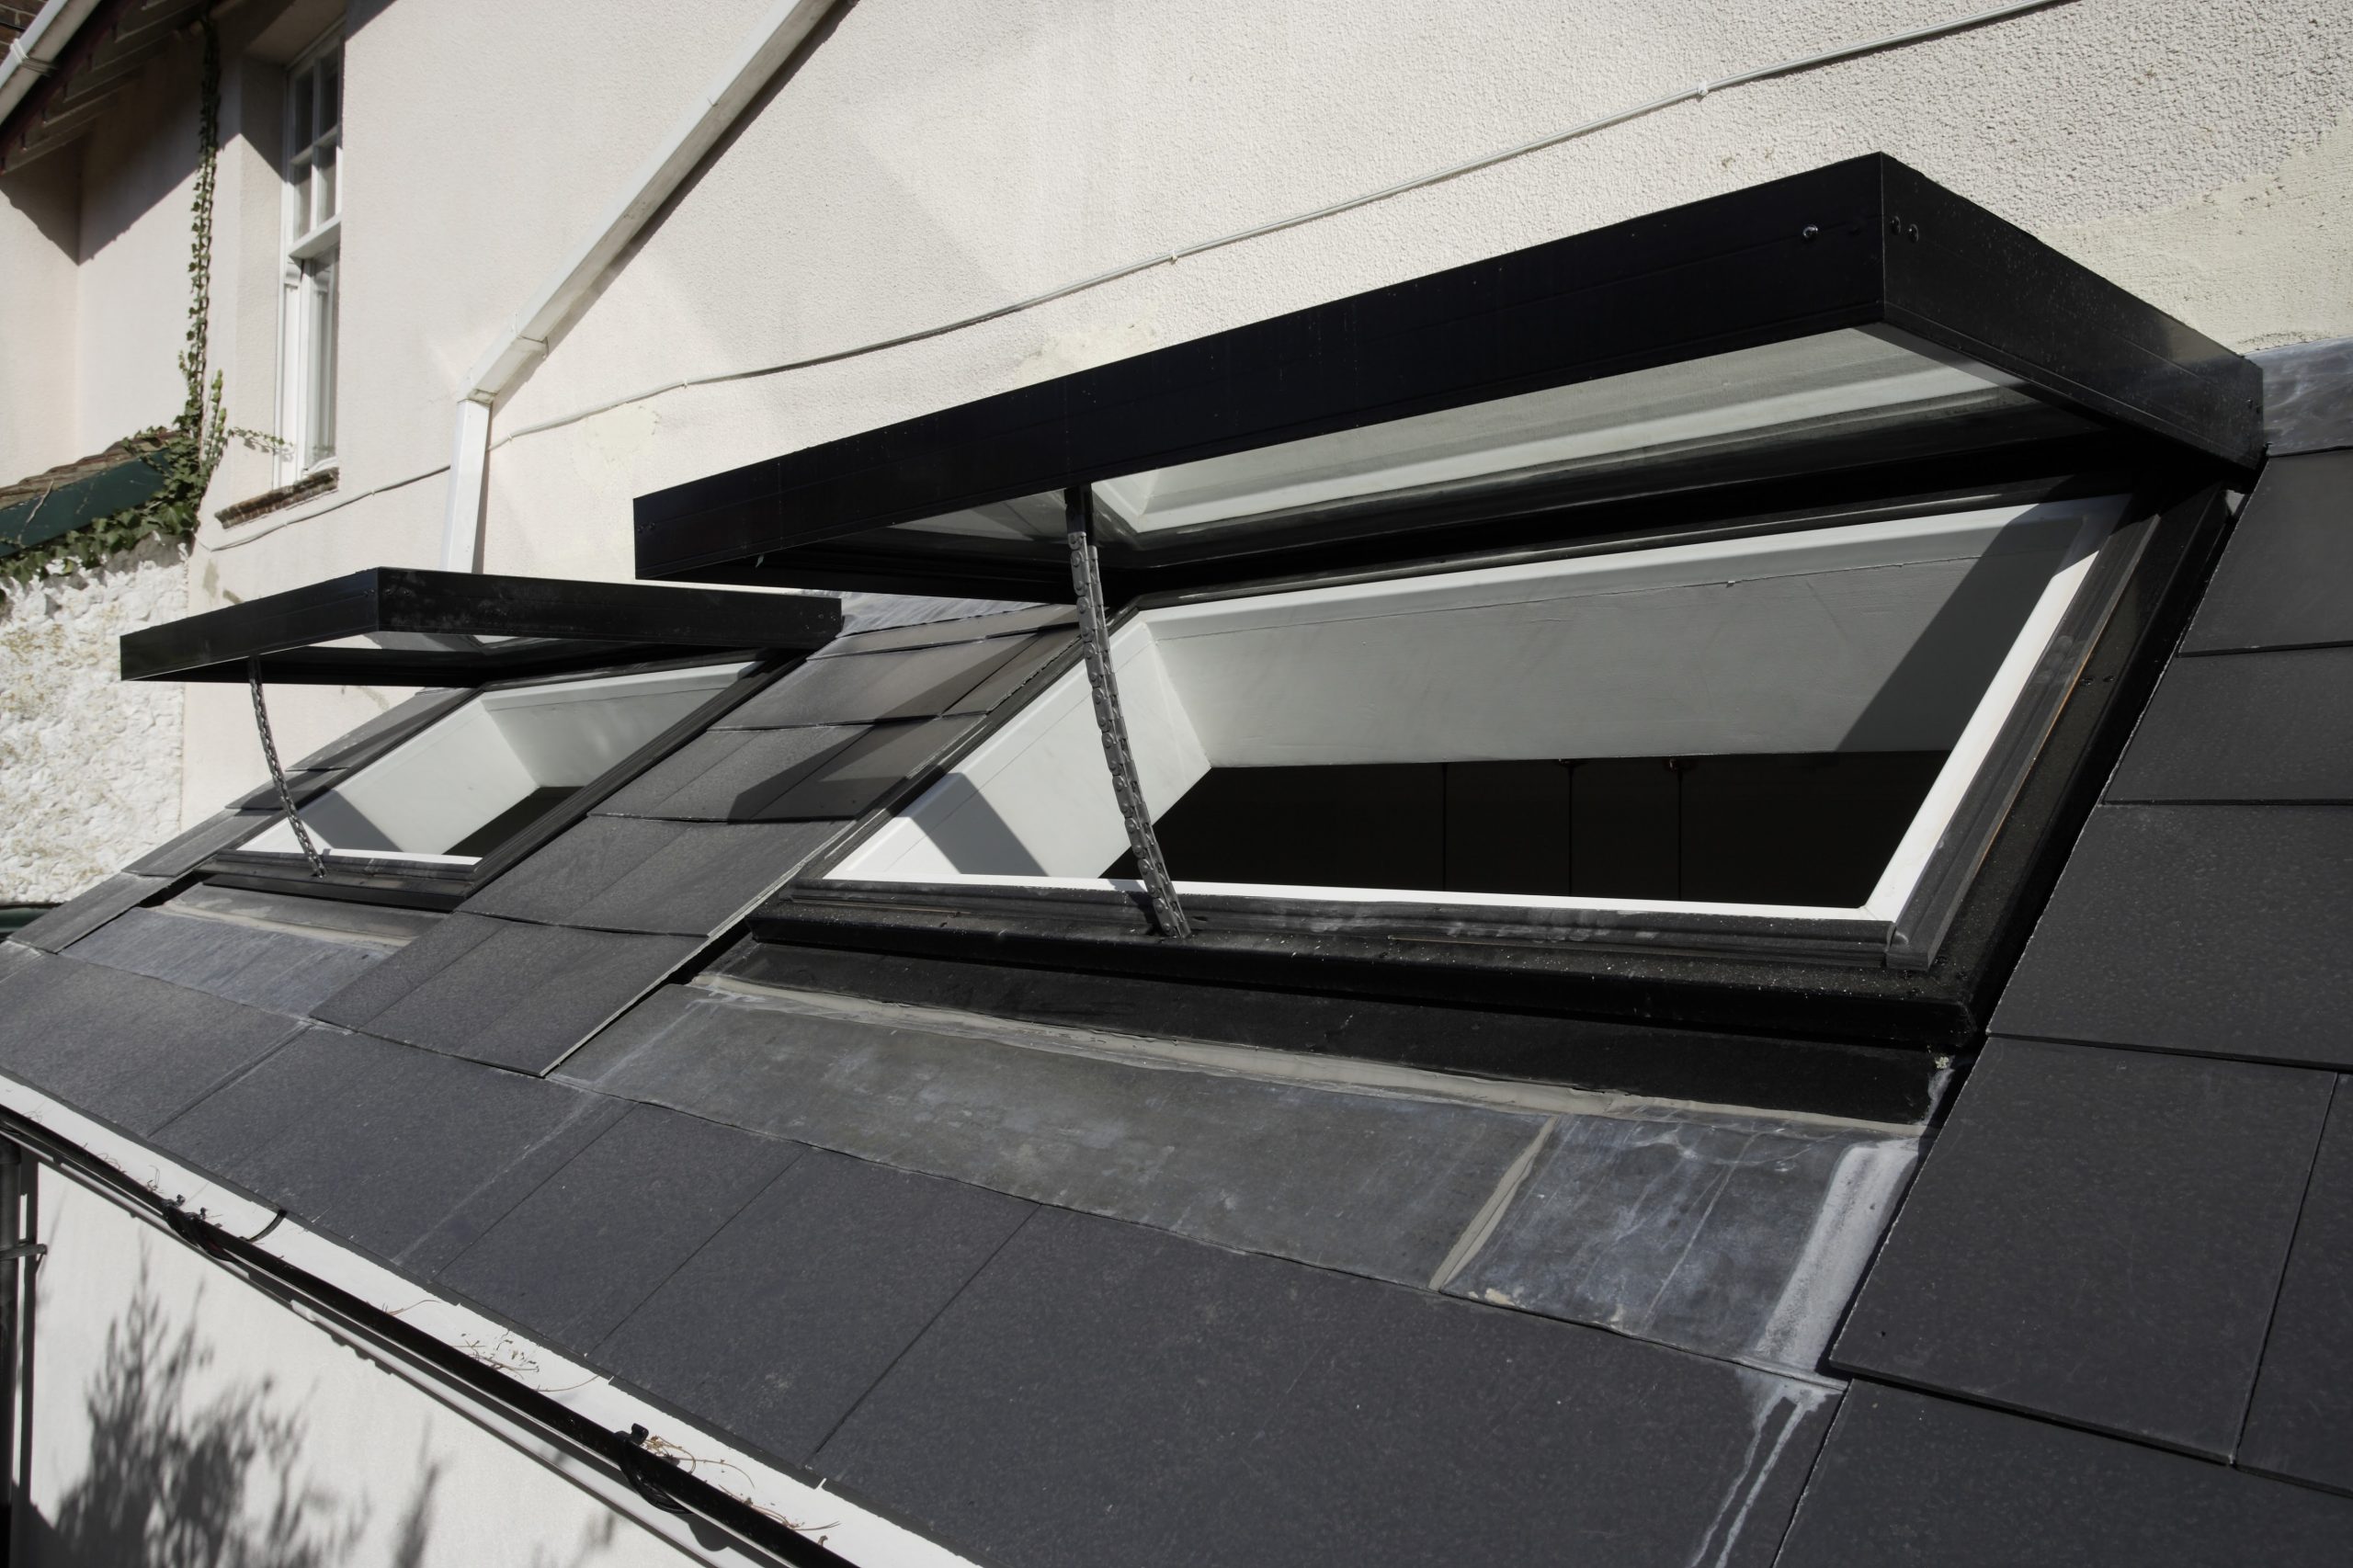 Why do you need marine-grade powder coating on your rooflight?